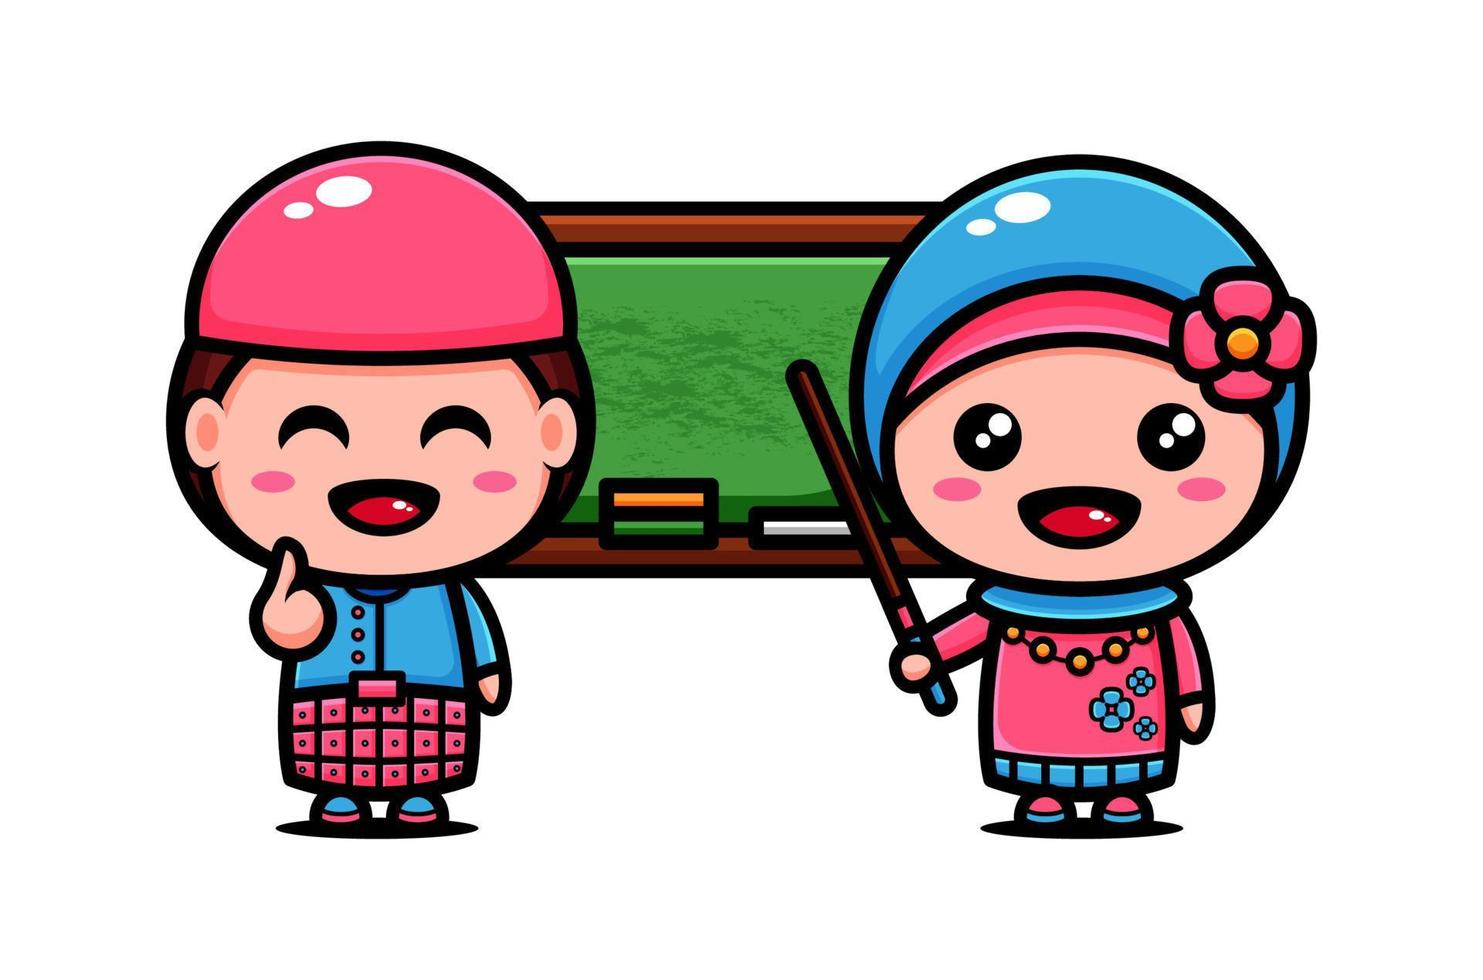 Cute muslim couple character design themed study together with board. Islamic character cartoon vector